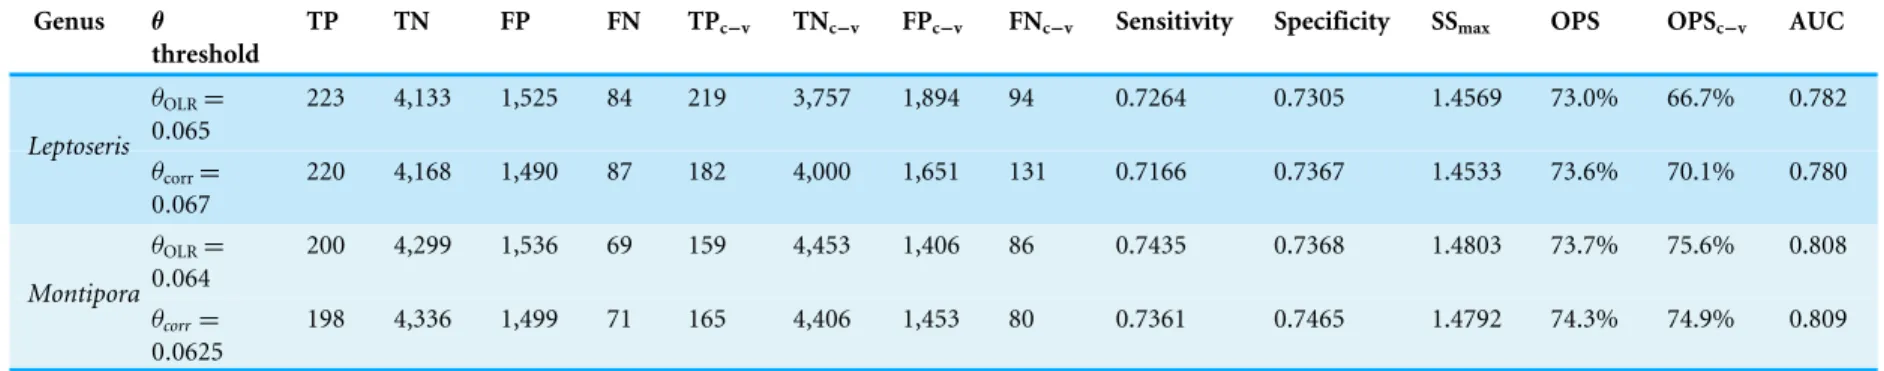 Table 4 Predictive models output. Results by genus: theta threshold subscripts indicate model type and training and validation (c-v) outputs